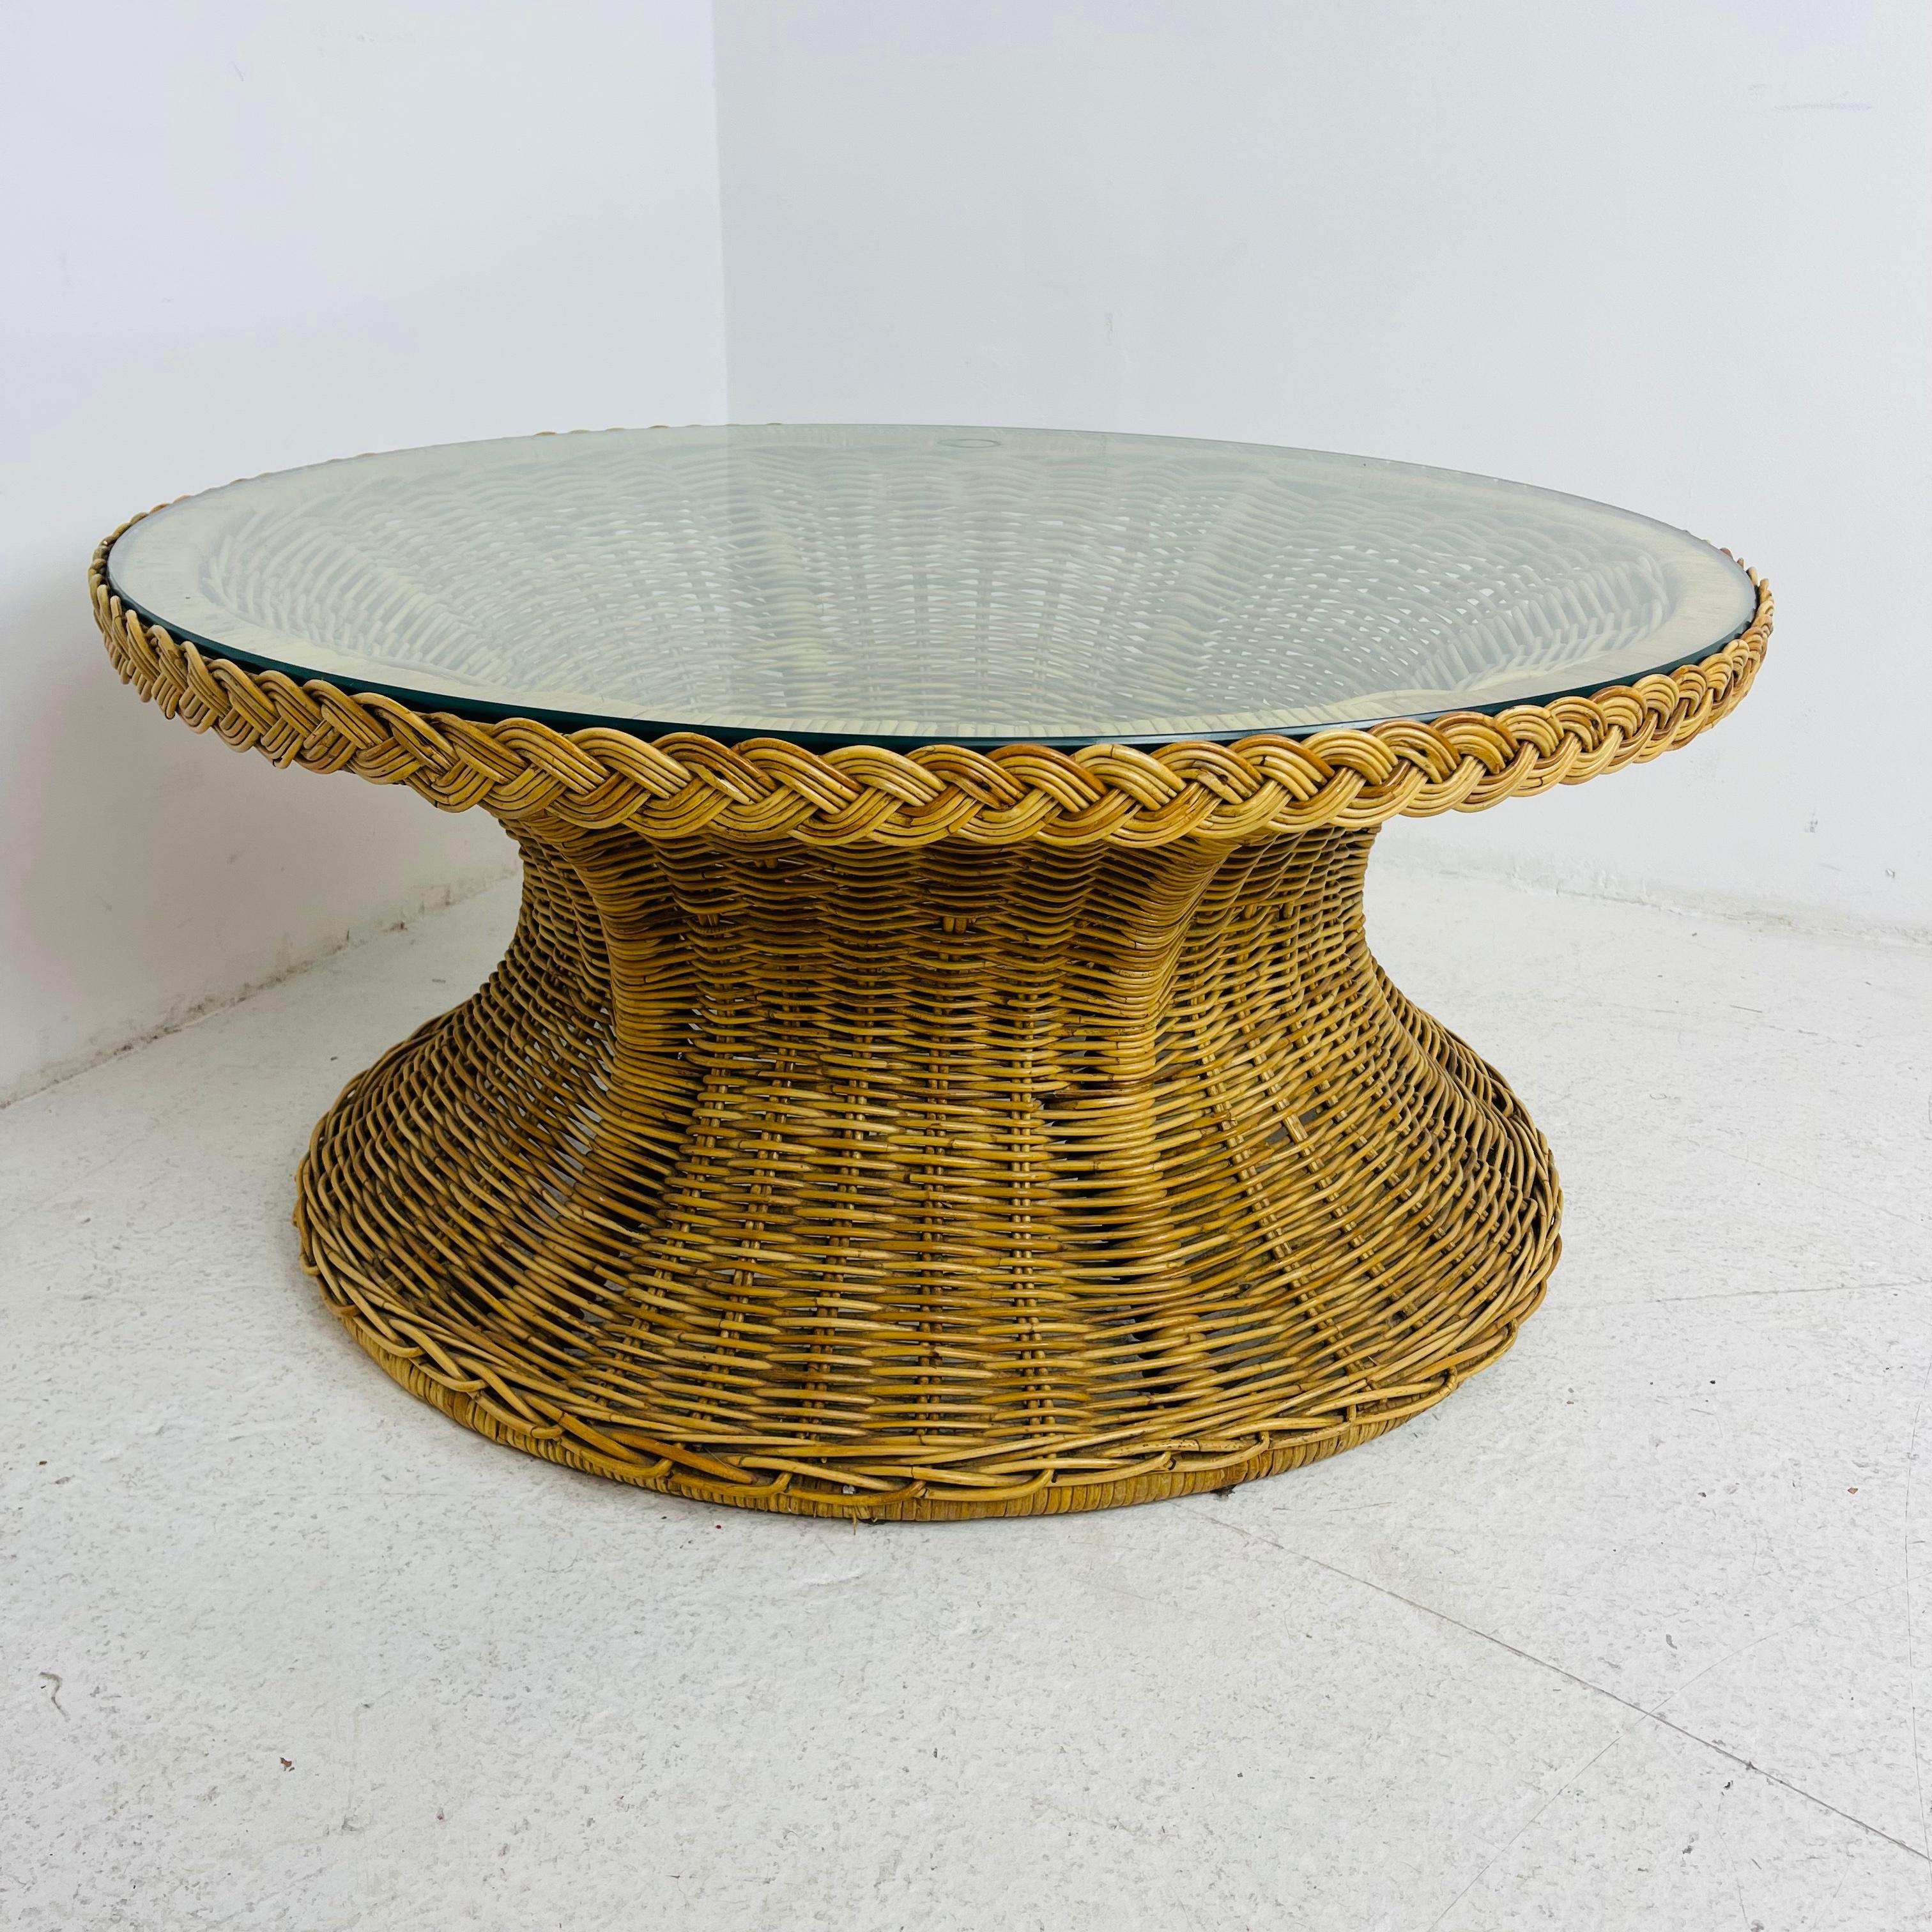 Wicker Works glass top coffee table with signature braided rattan edging. Some very minor imperfections (pictured) but overall great condition.